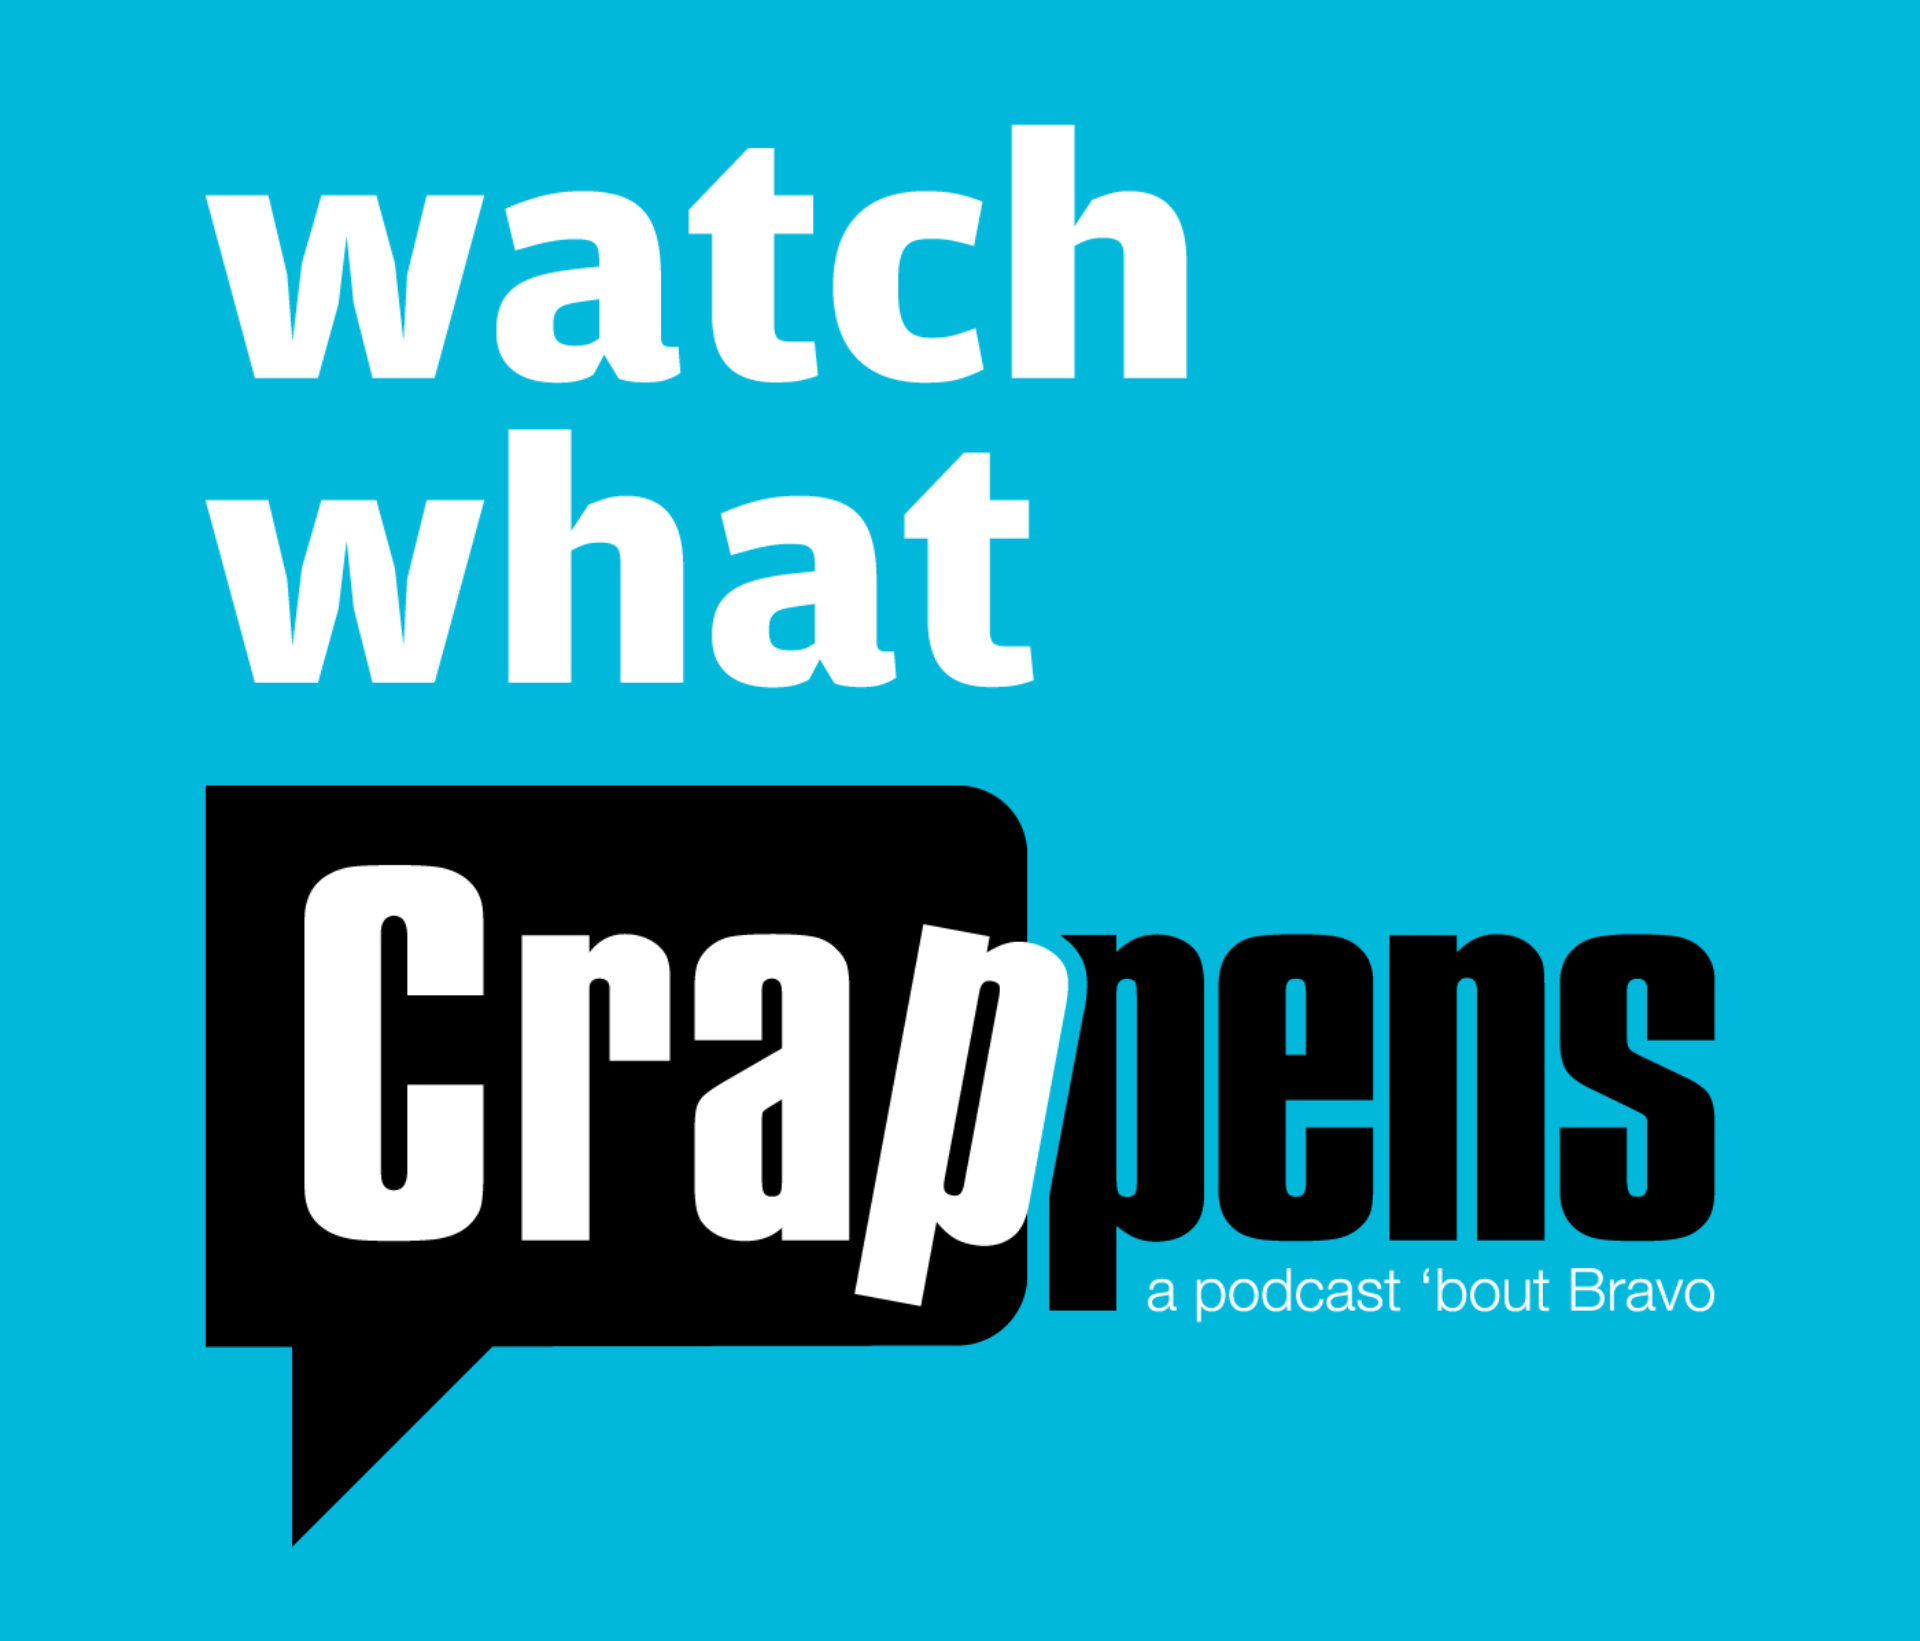 Watch What Crappens Podcast